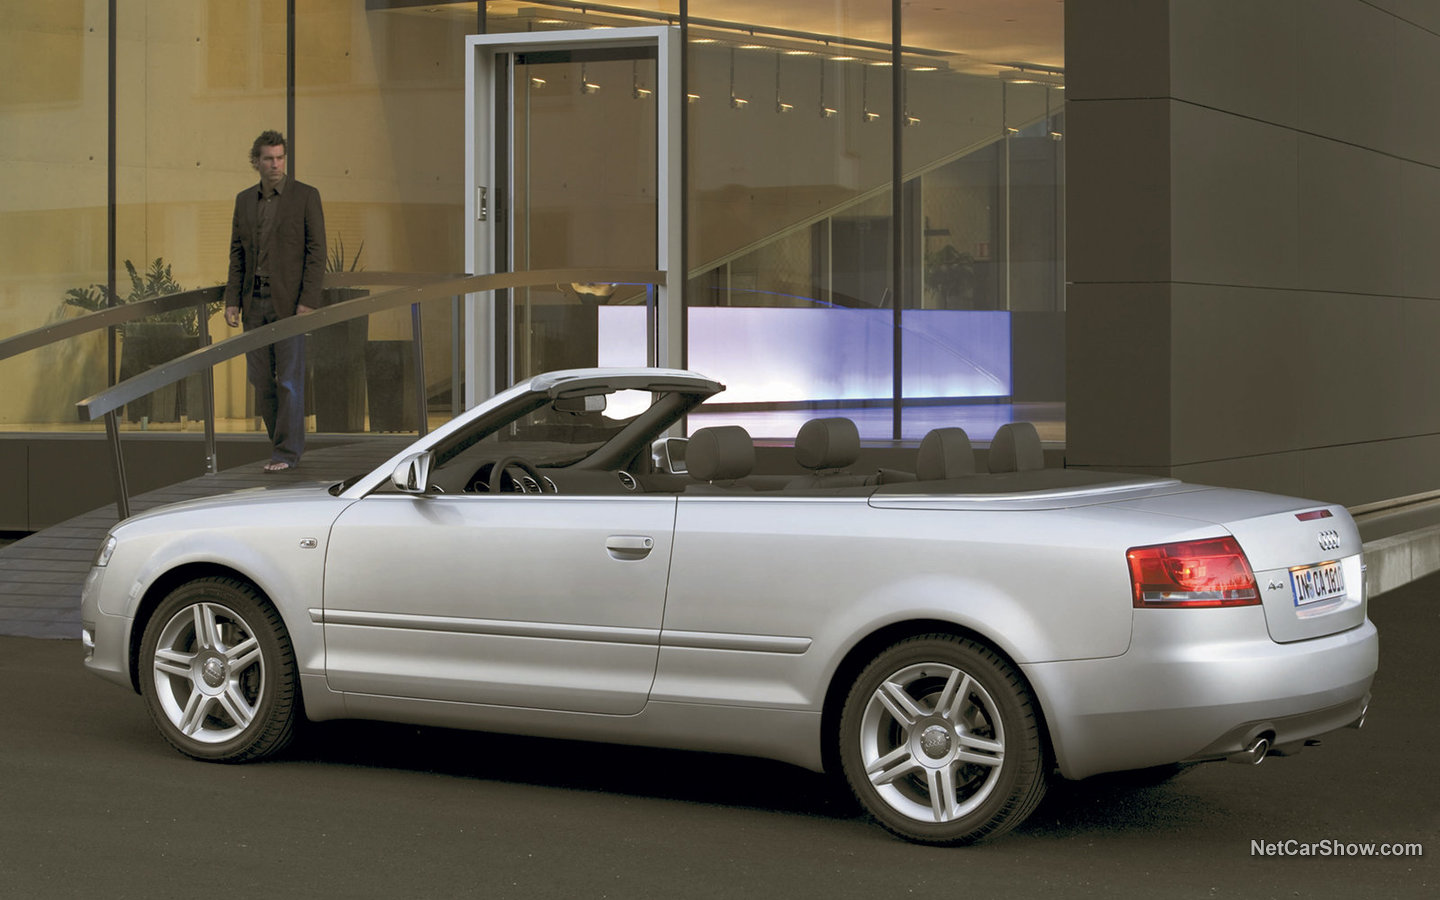 Audi A4 Cabriolet 2006 aabe02a9